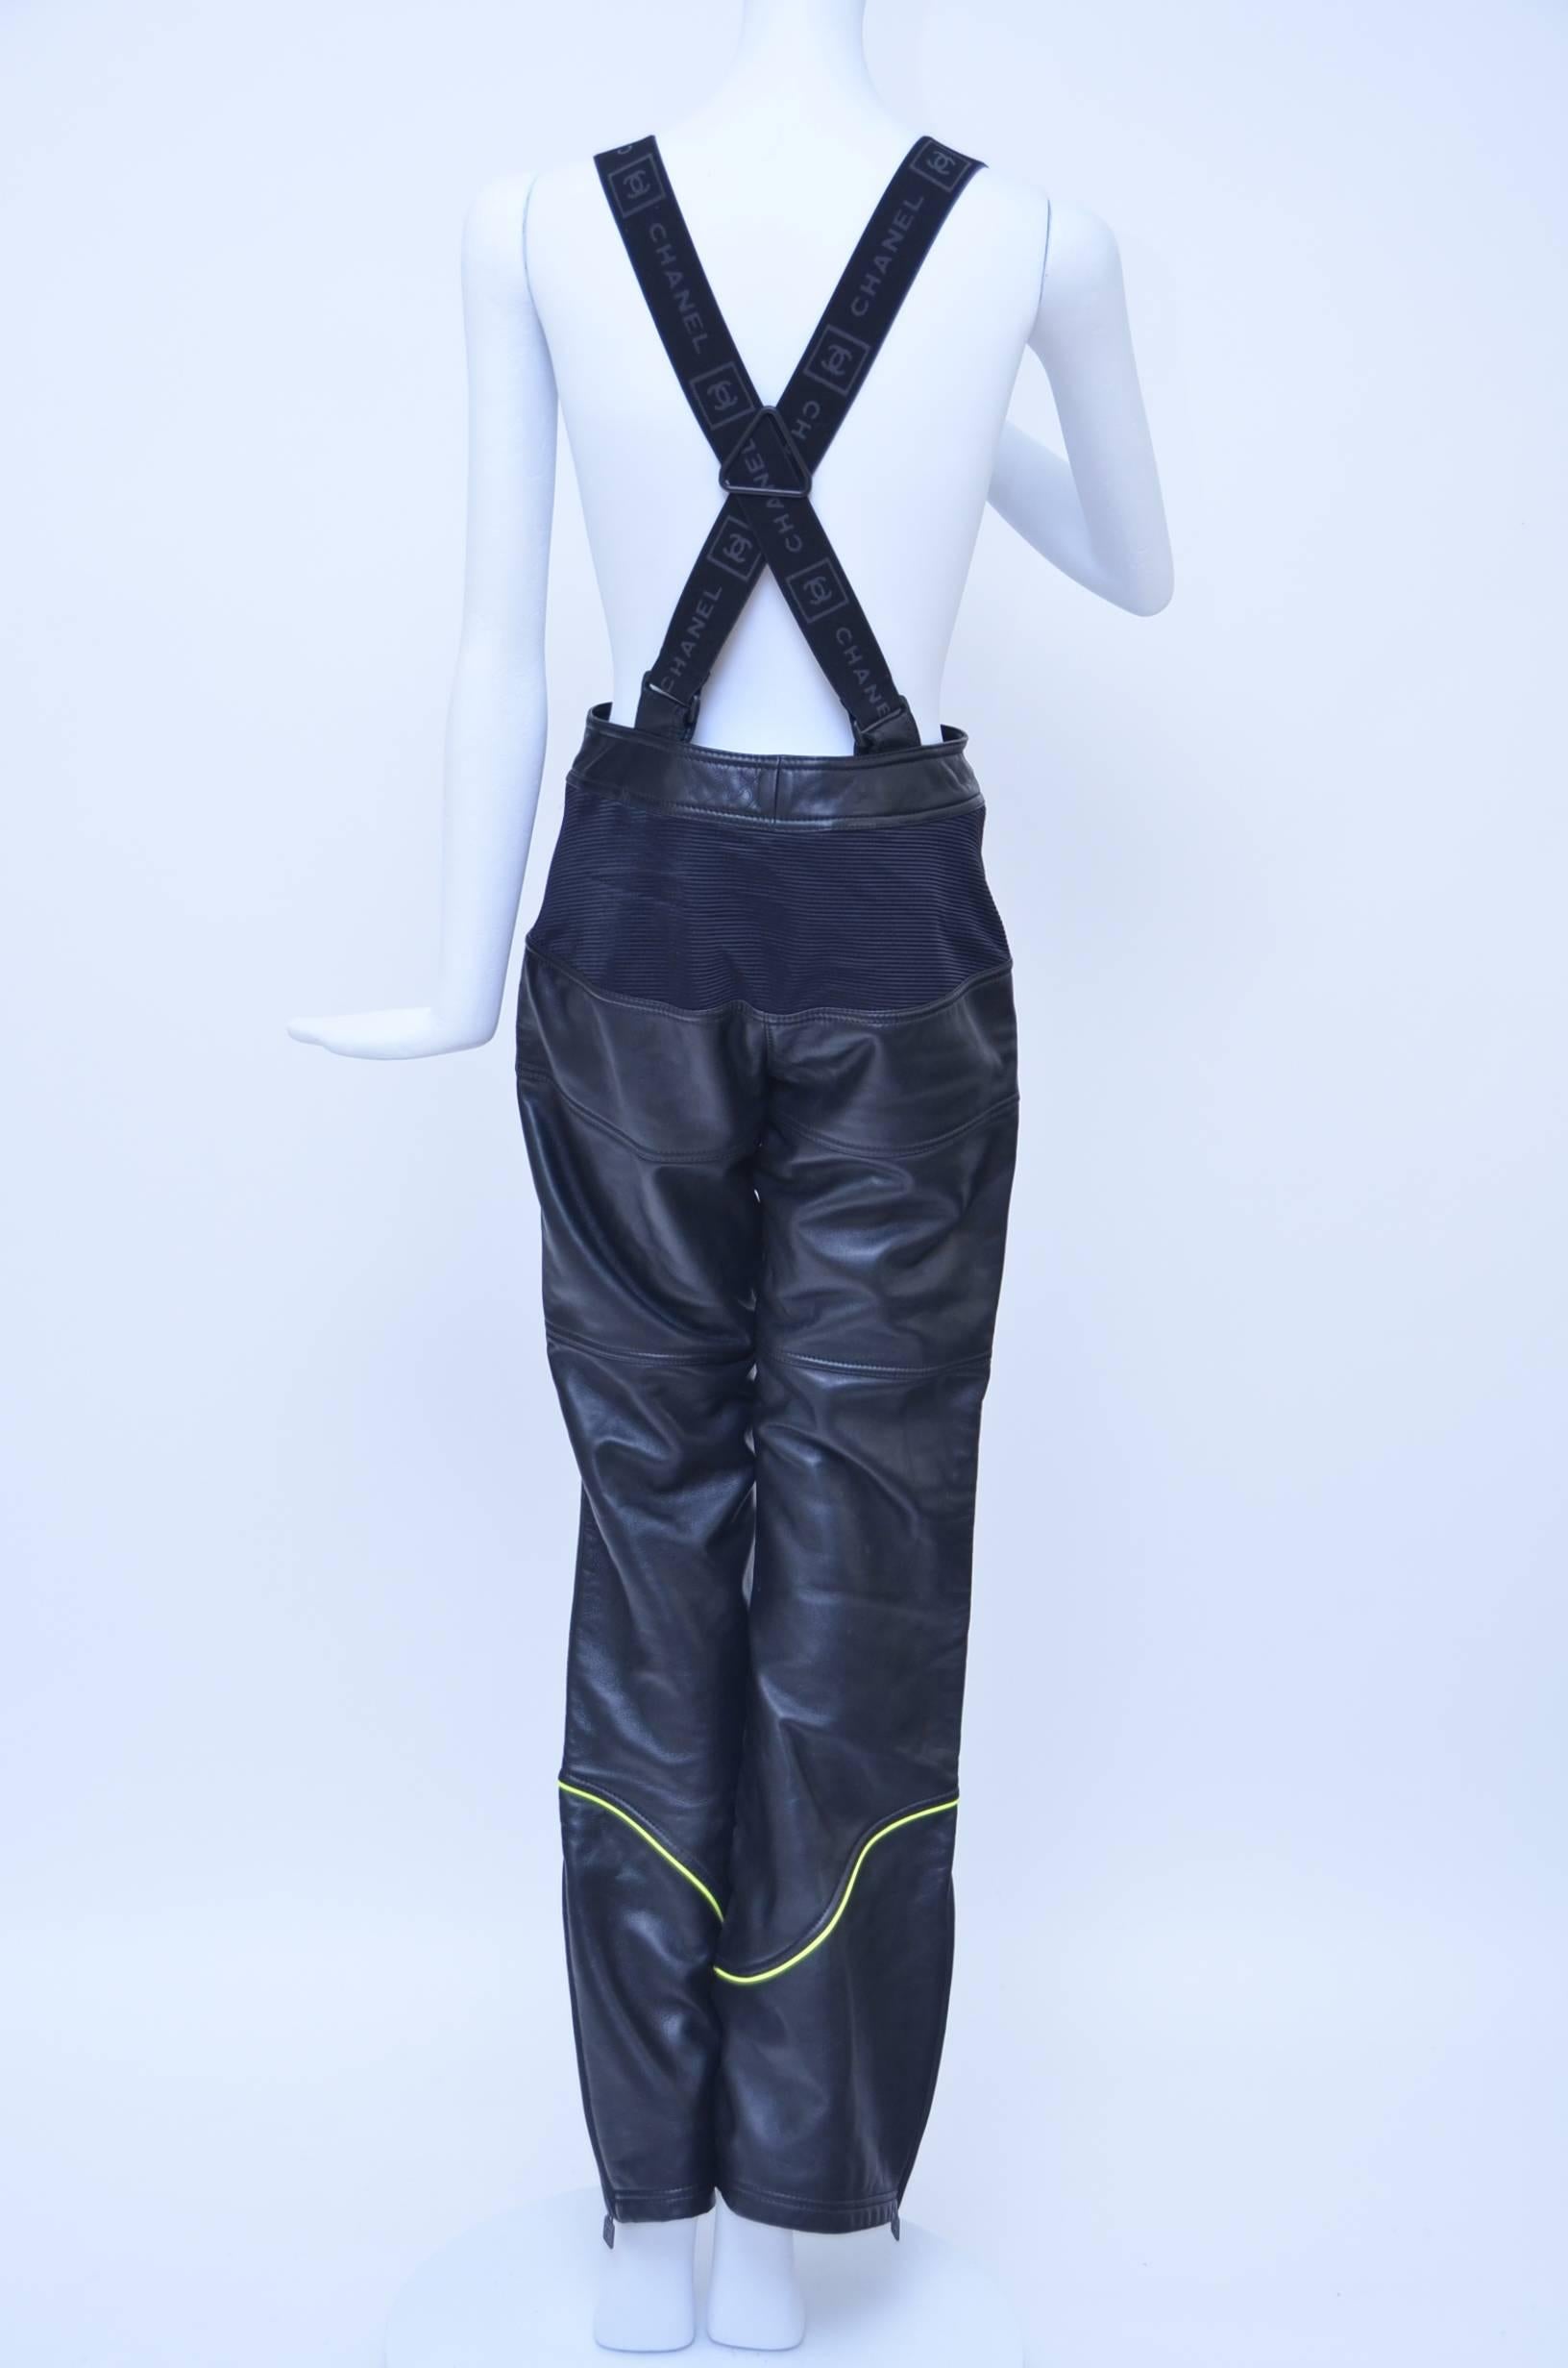 Chanel 2004 runway ski pants with suspenders.
Seen on Victoria Beckham.
Condition:Brand new with tags......They might have couple minor marks from the storage.
Please note:one of the snaps (second snap ) is showing slightly